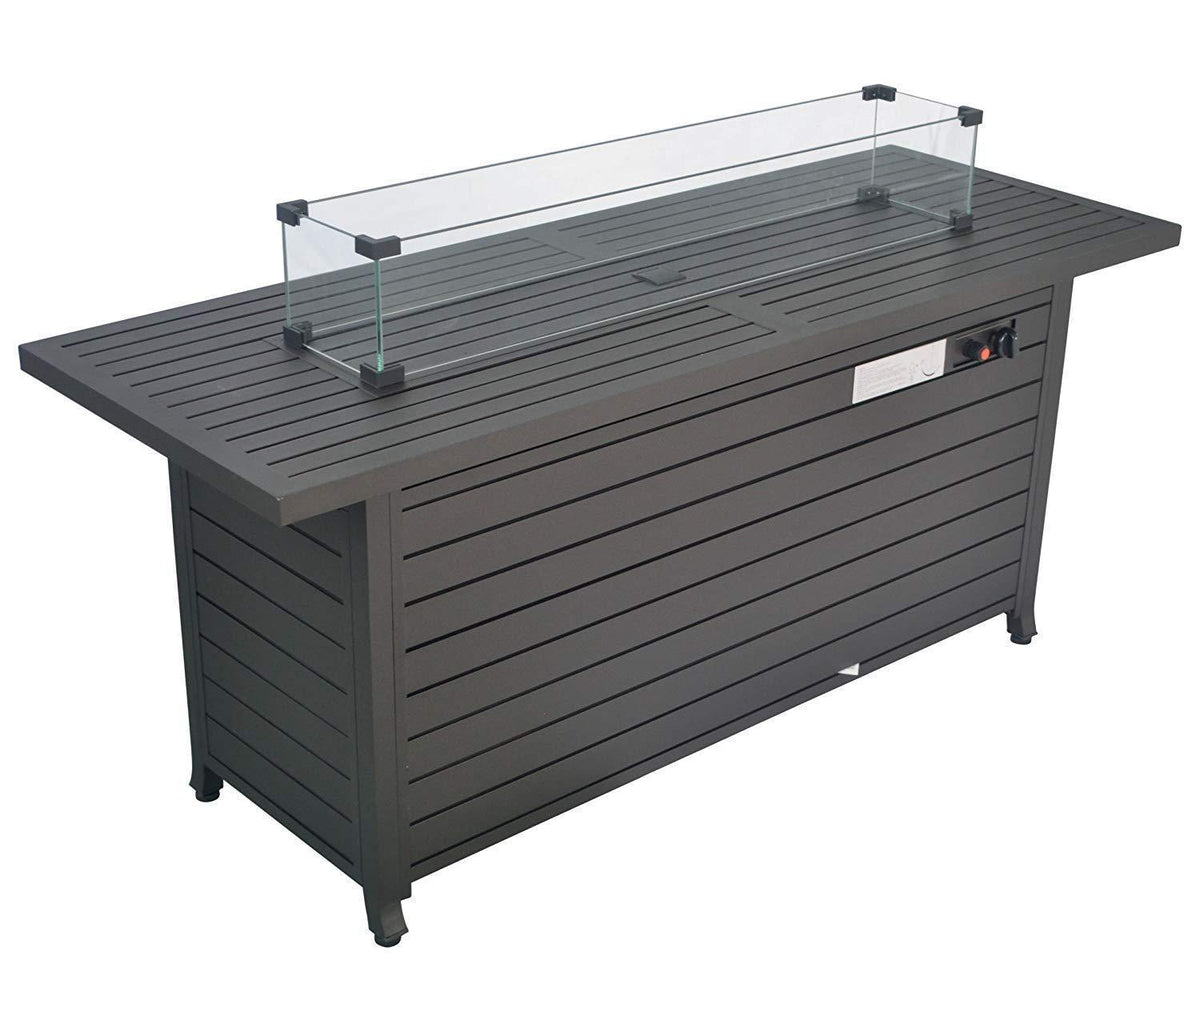 57in Propane Fire Pit Table 50000BTU with Lid, Wind Guard,Dust Cover & ETL Certification